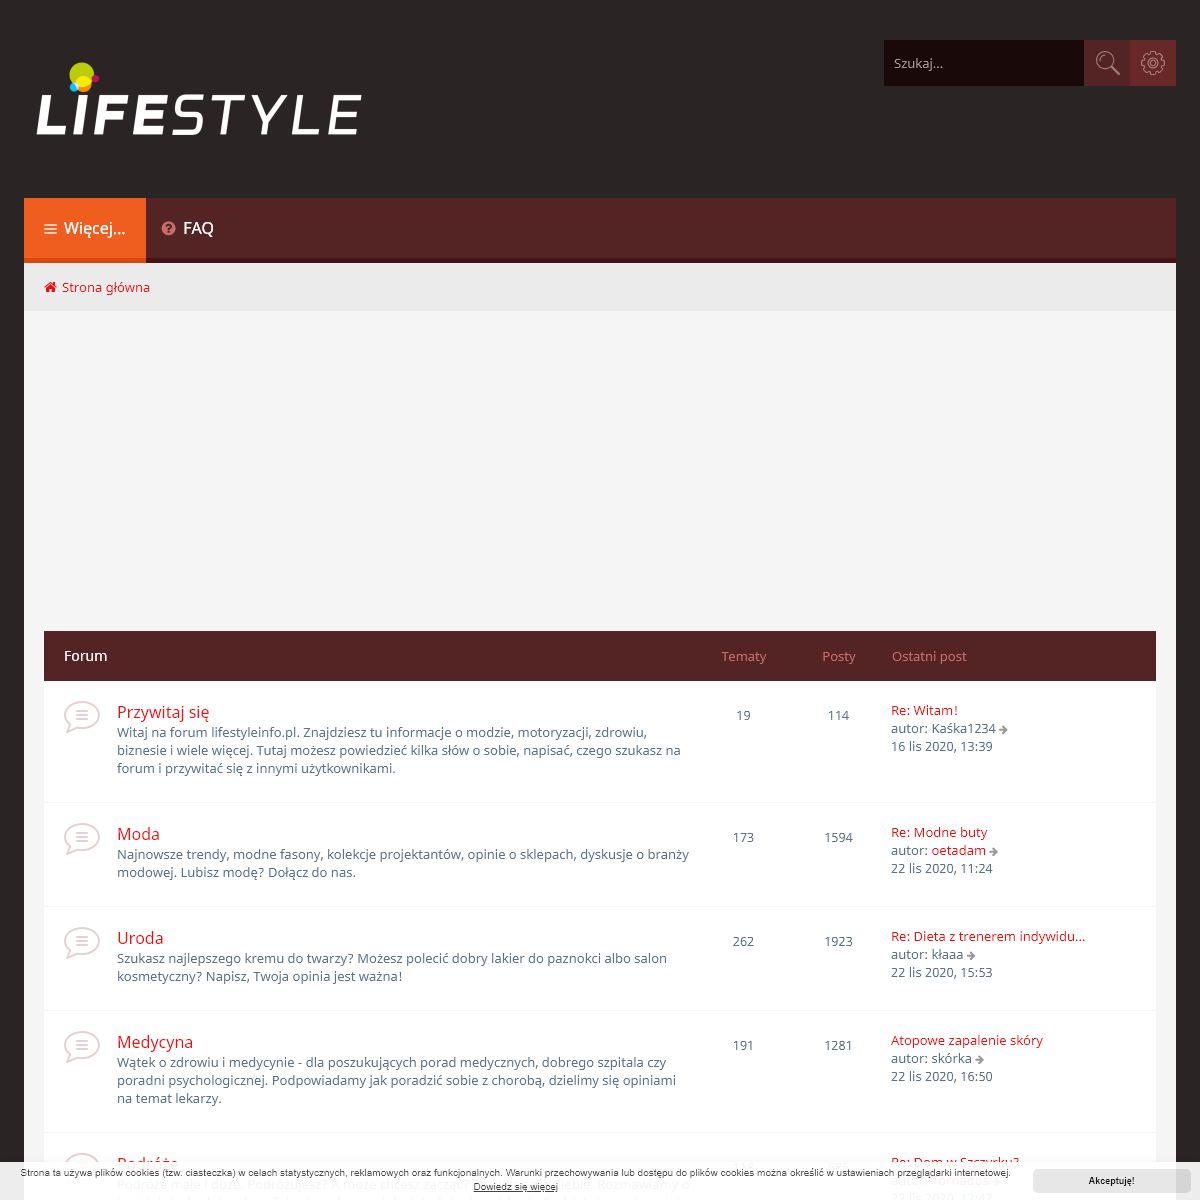 A complete backup of lifestyleinfo.pl